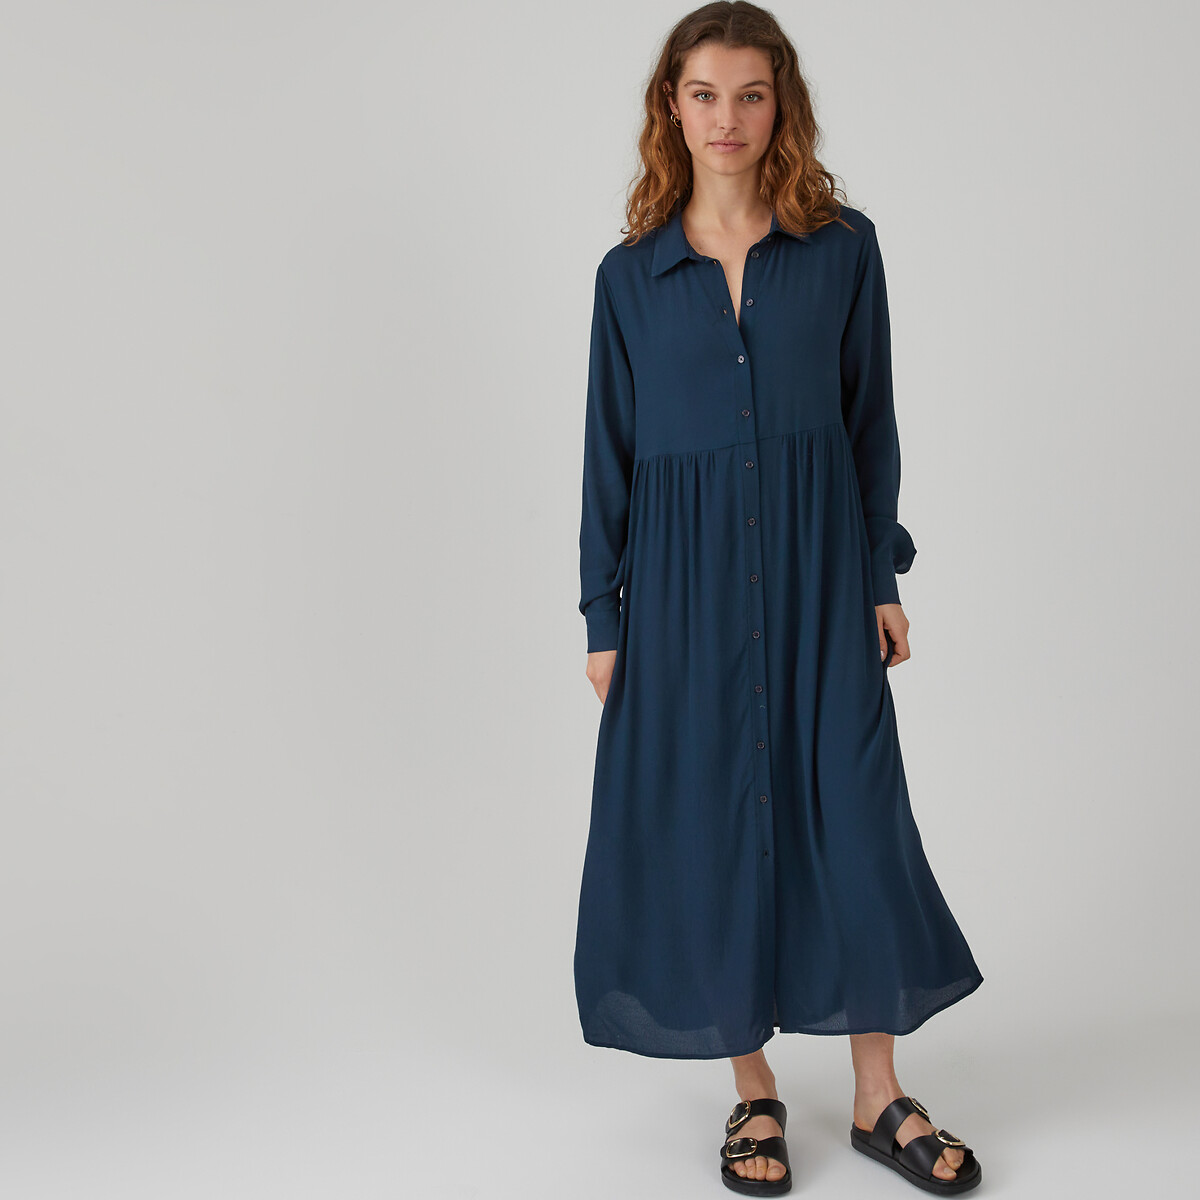 Tiered midaxi shirt dress with long sleeves La Redoute Collections | La ...